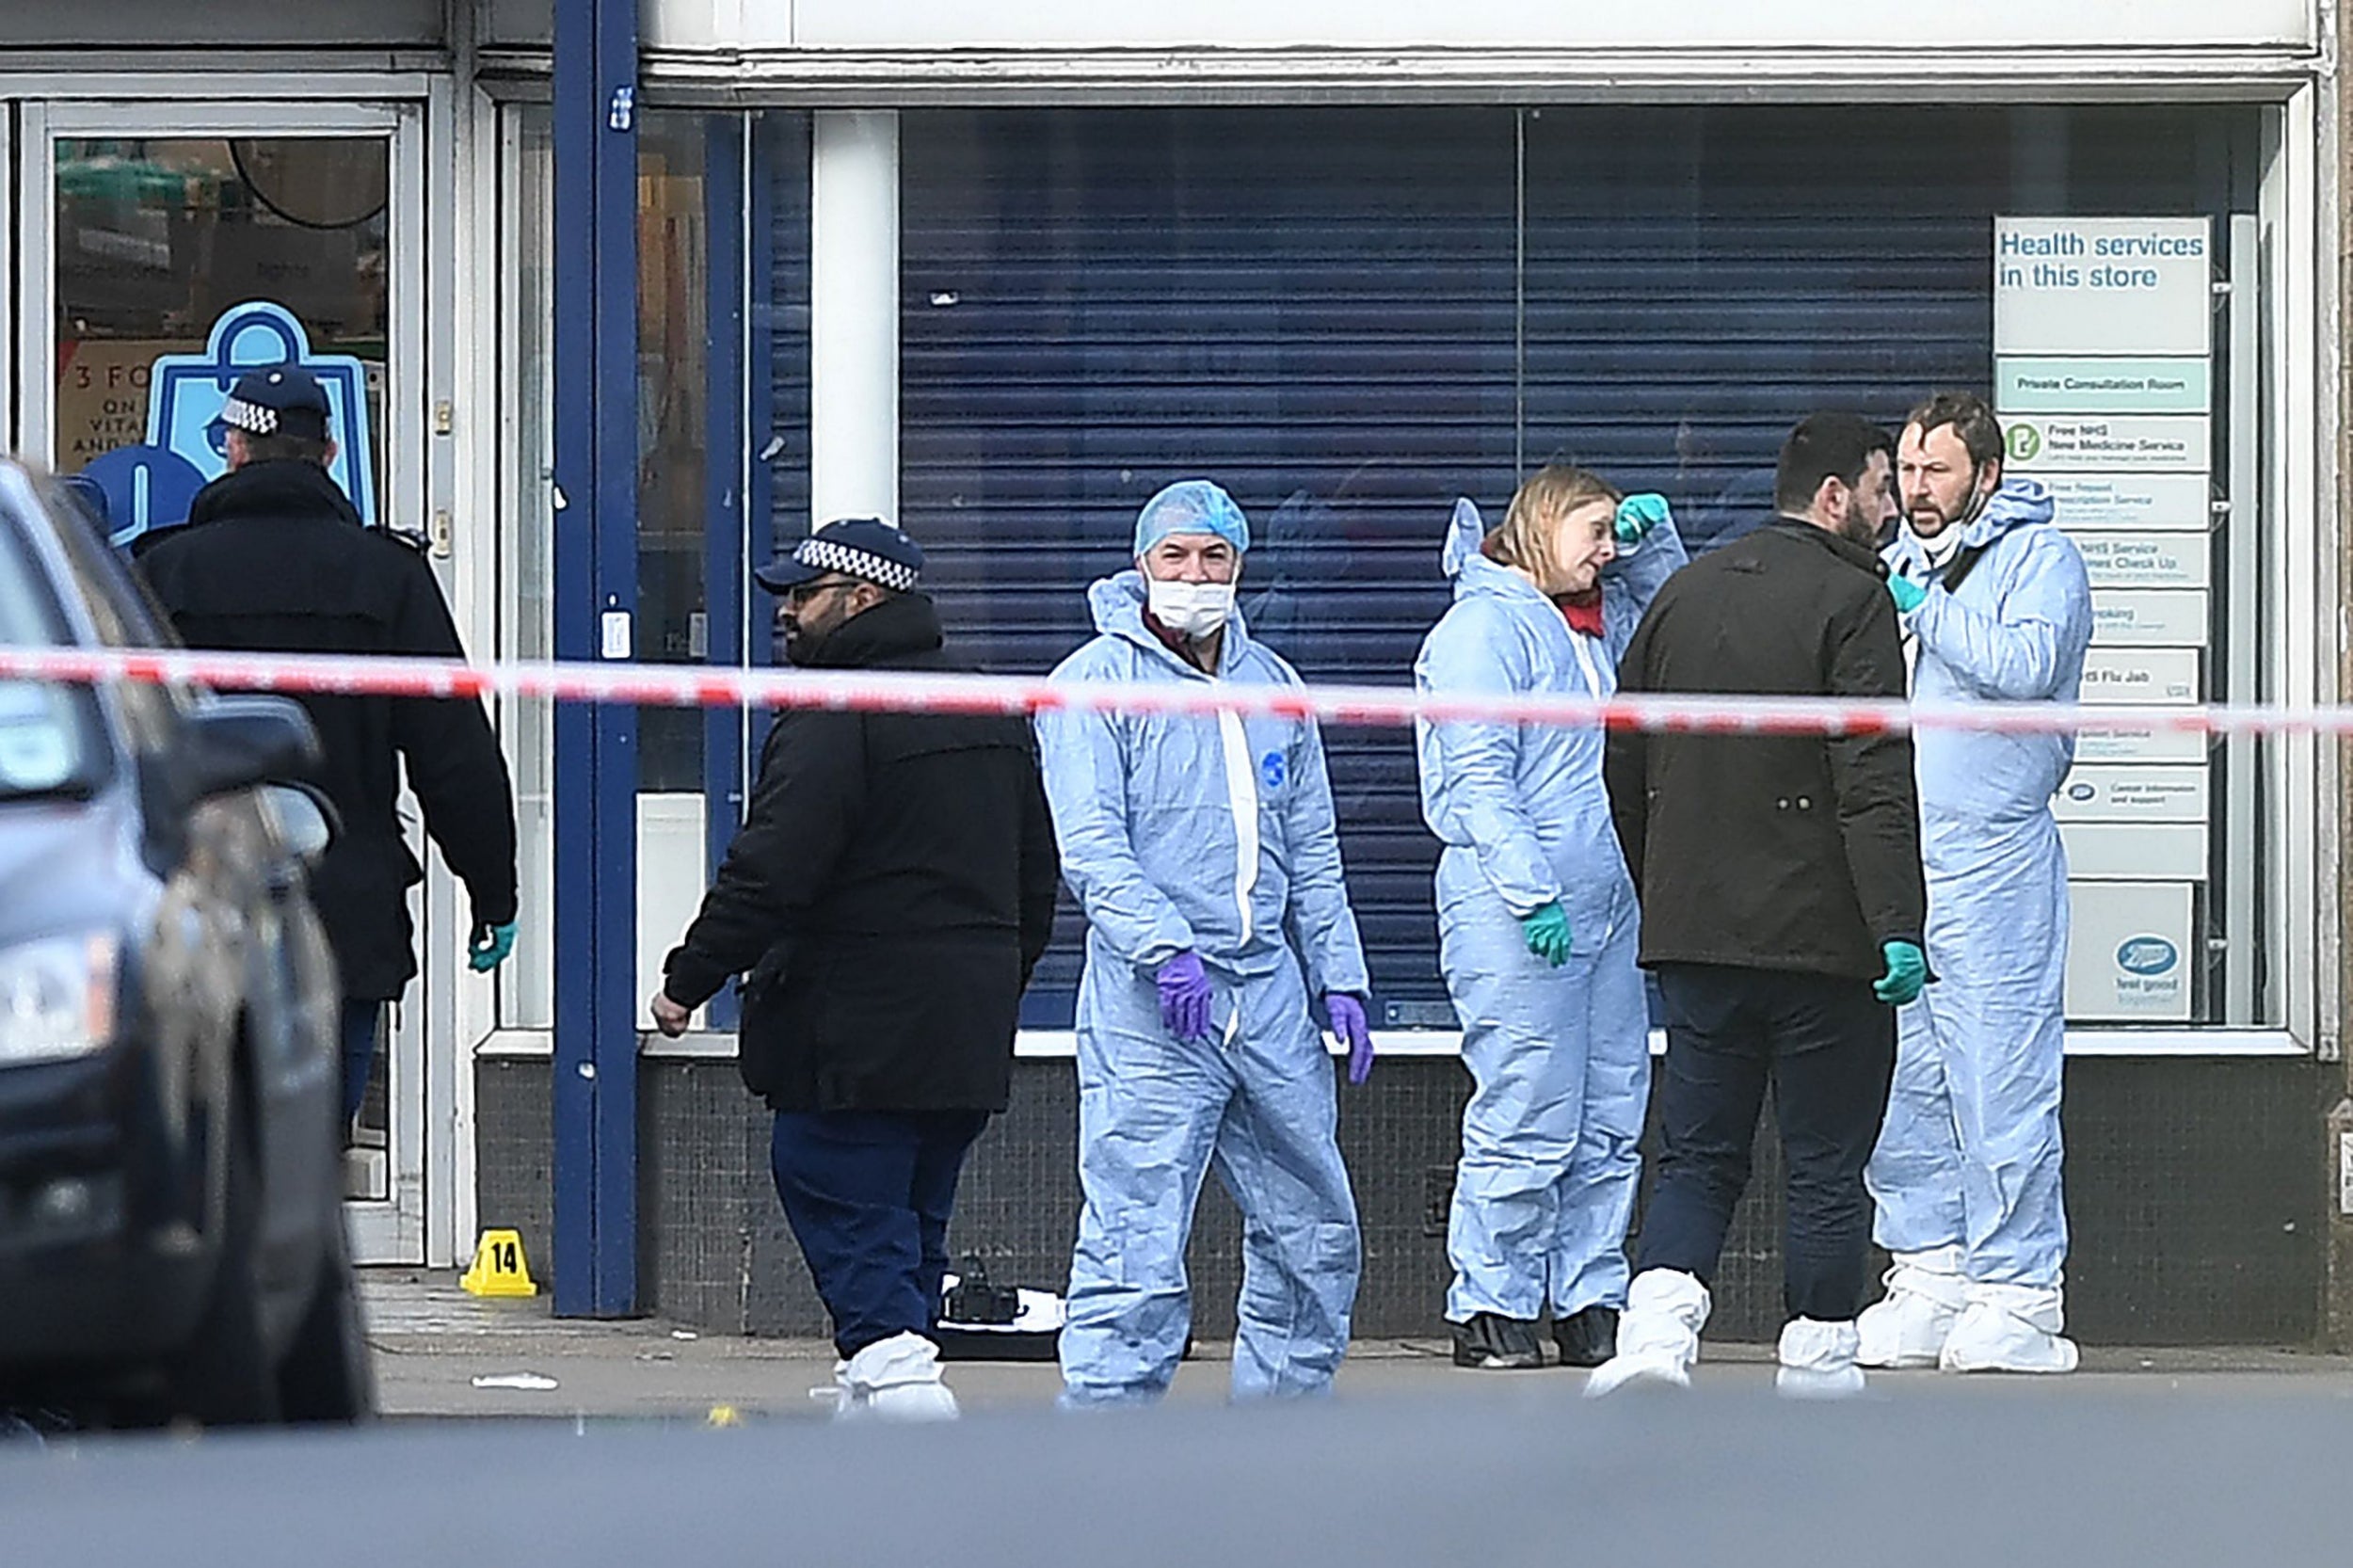 Police forensic officers on Streatham High Road in south London after Sudesh Amman stabbed two bystanders